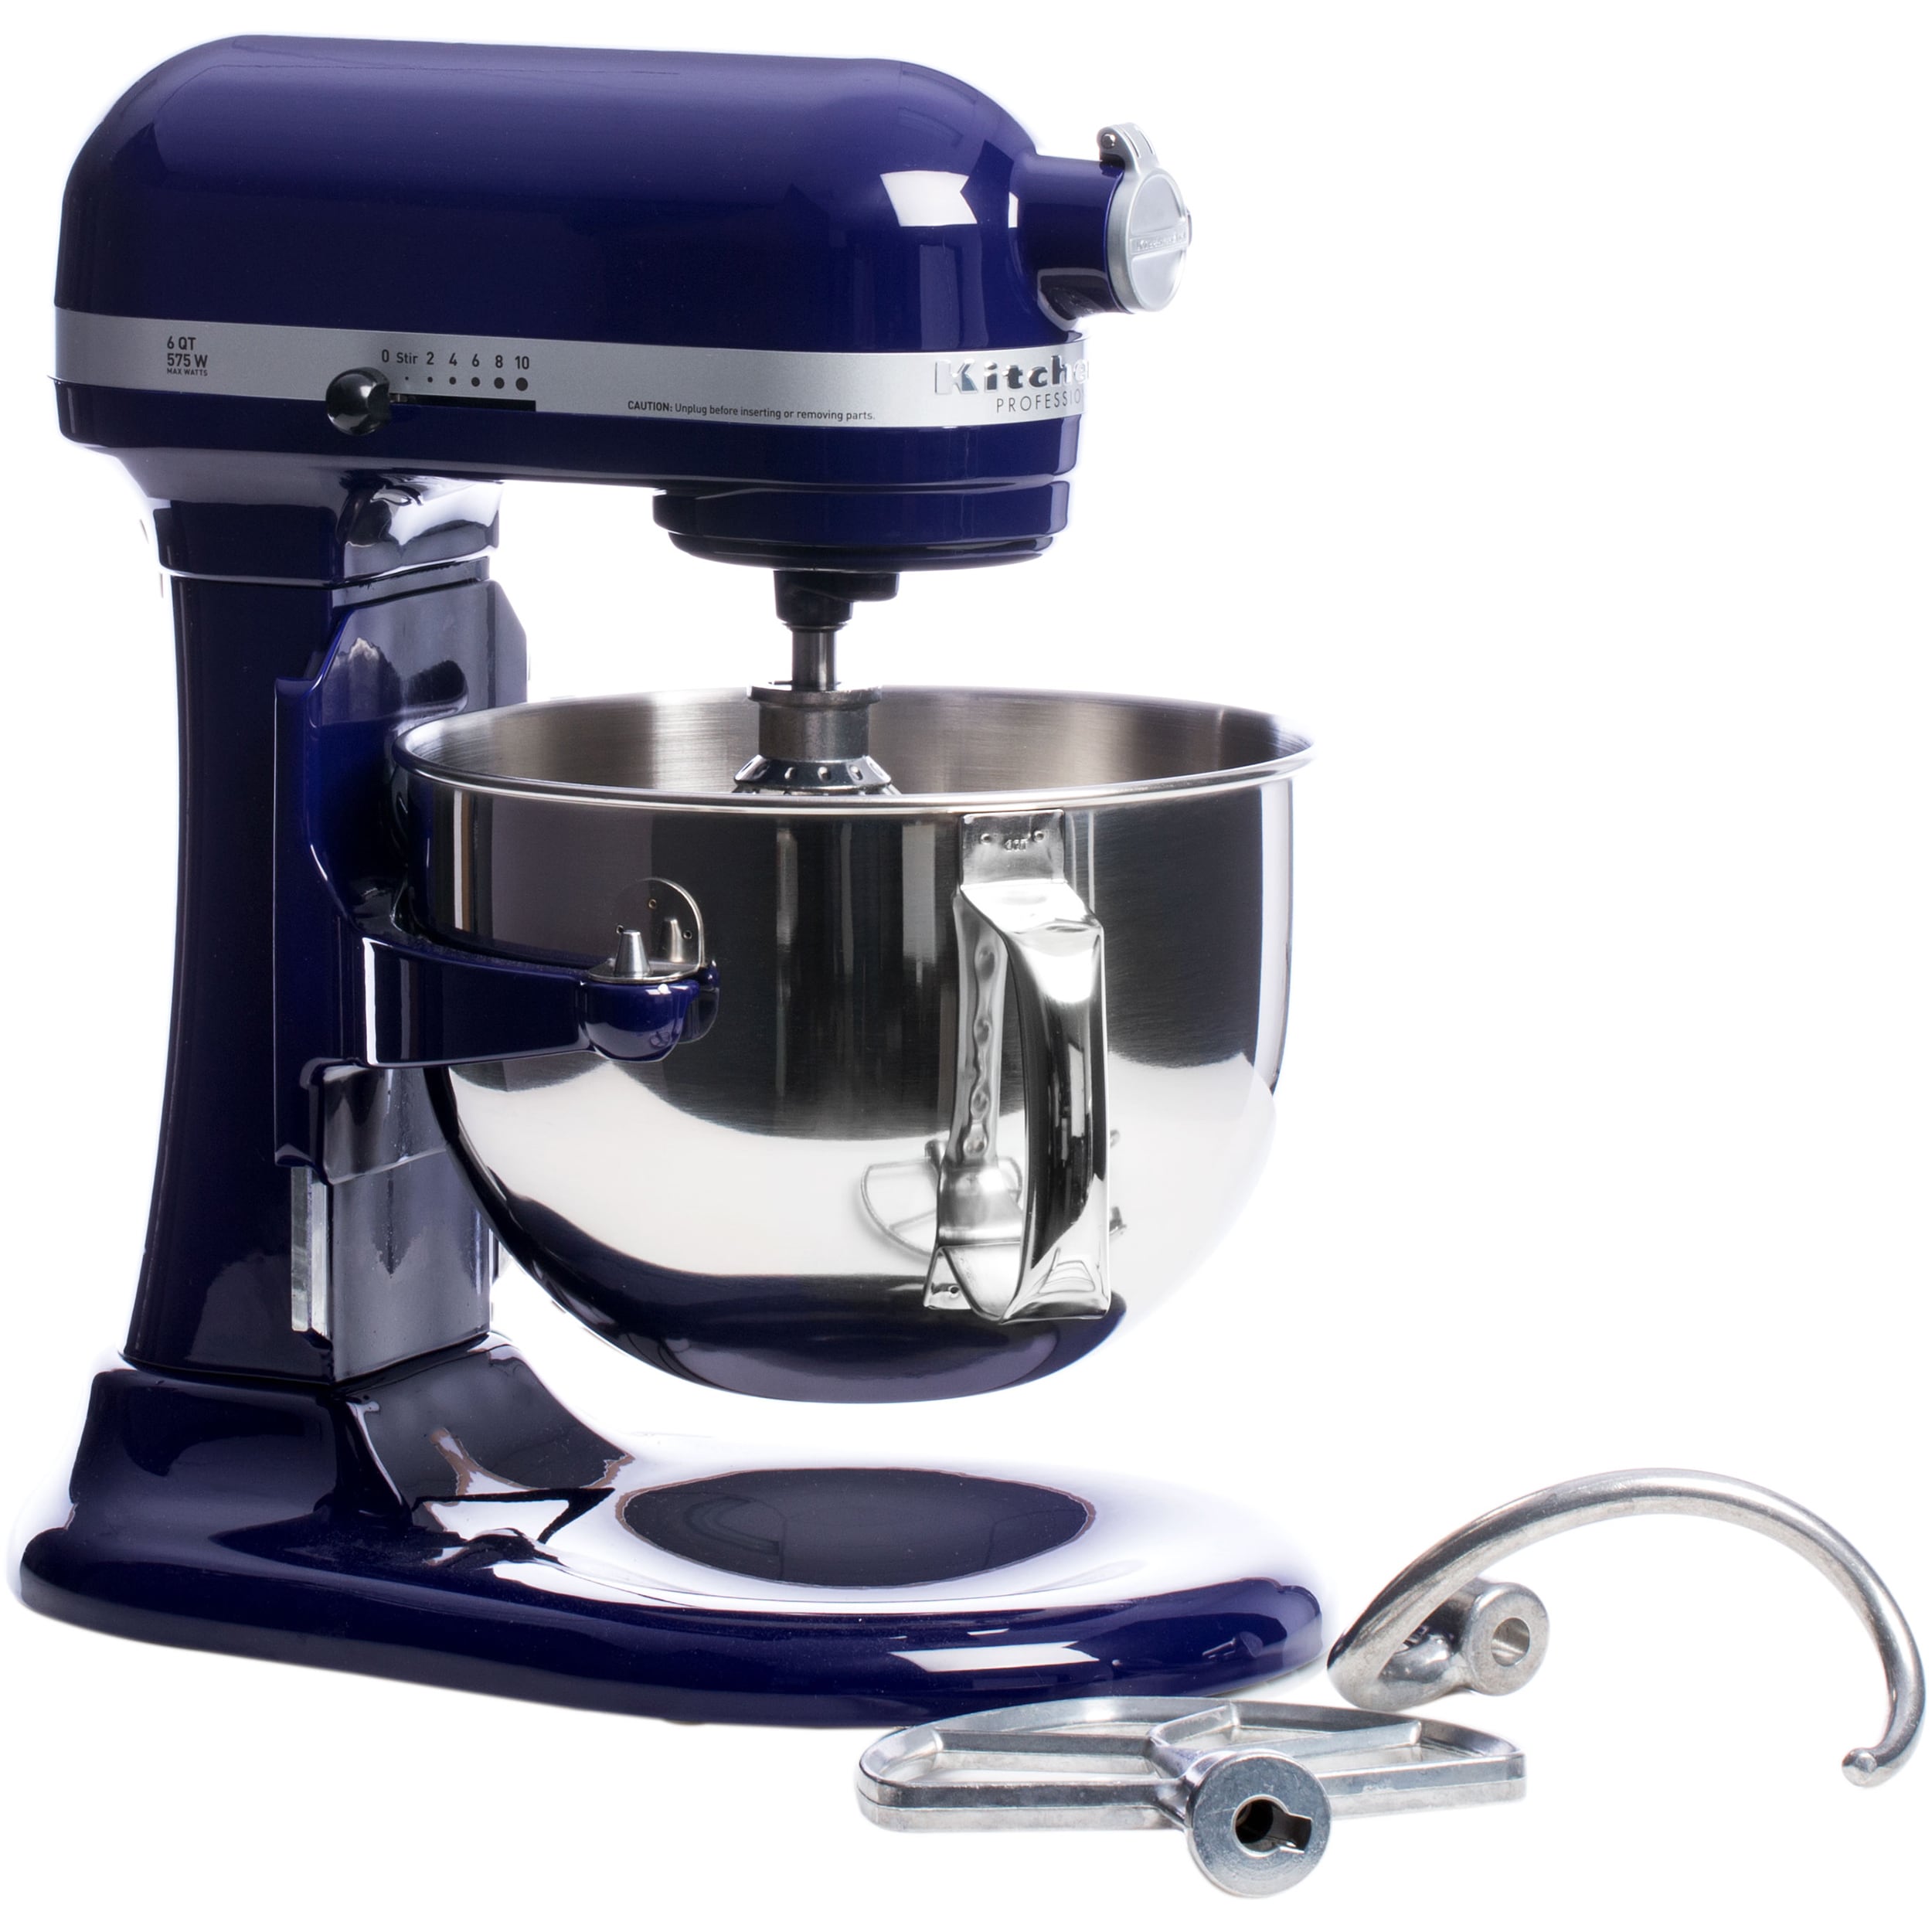 KitchenAid's stand mixer rocks a new color—Misty Blue - Reviewed